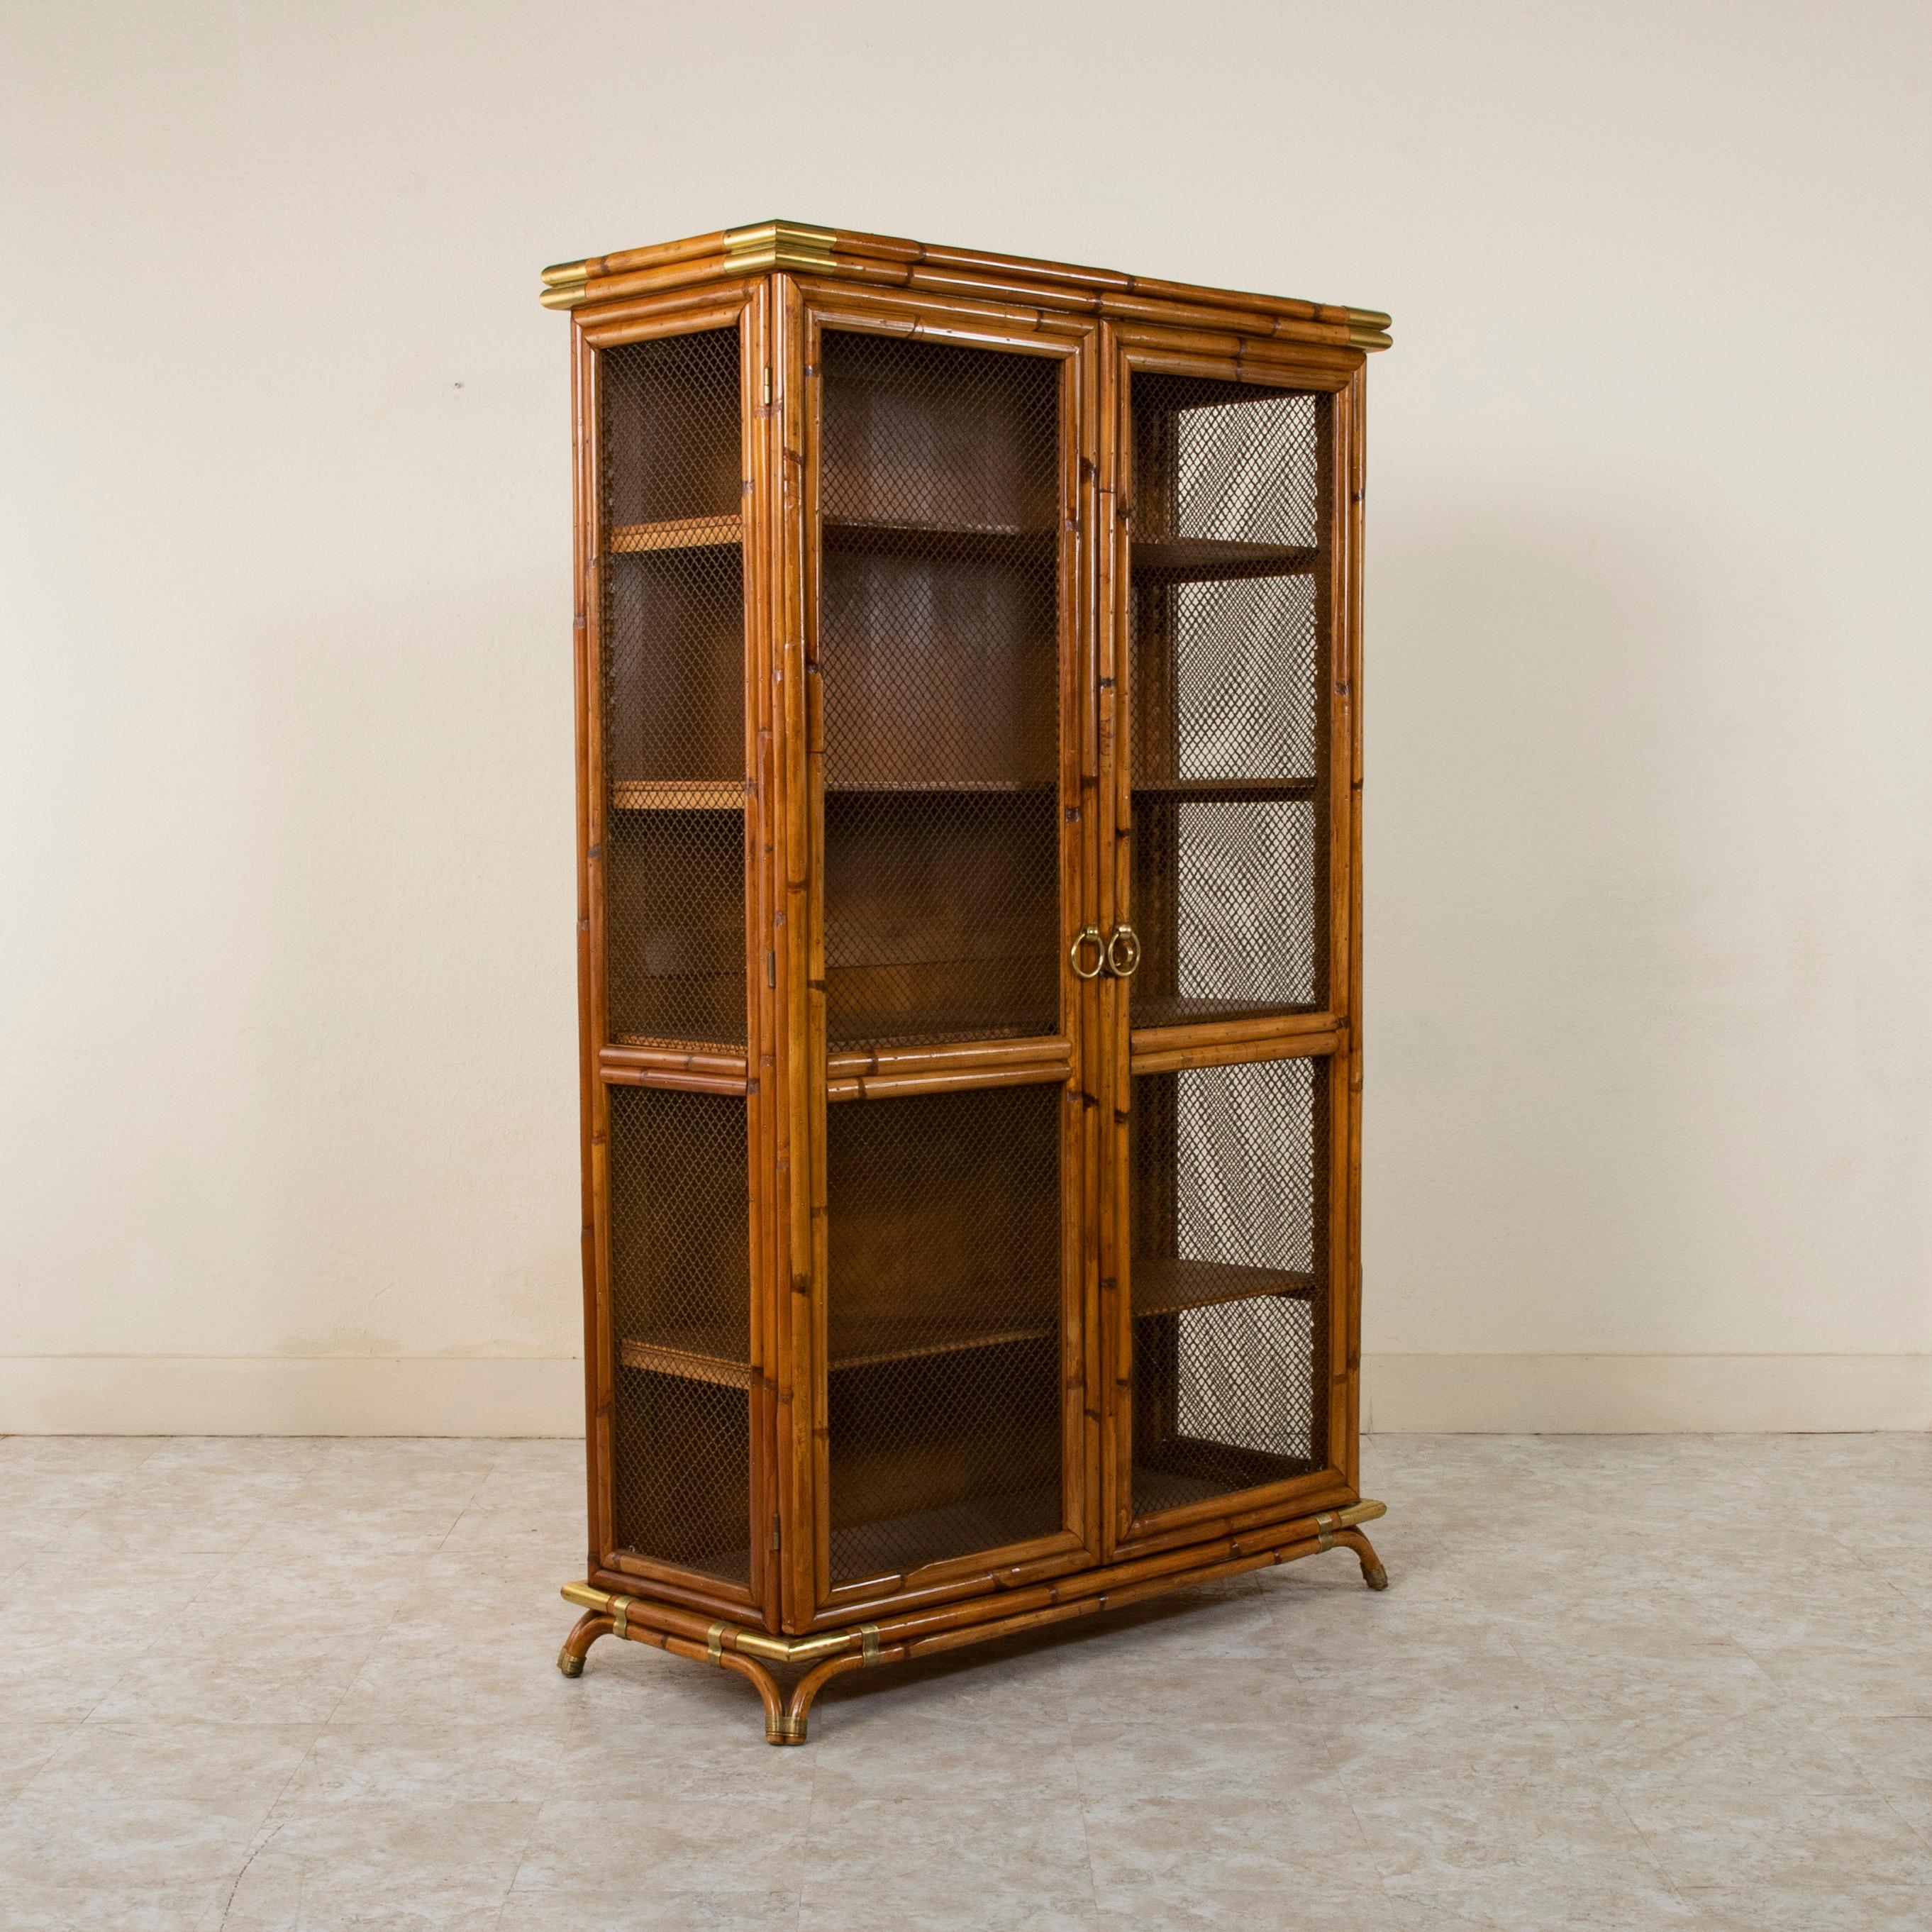 Attributed to Louis Sognot (1892-1970), designer for Maison Jansen, this mid twentieth century bookcase or vitrine is constructed of bamboo and features bronze wire on the front and sides. The corners of the piece and curved feet are all capped in